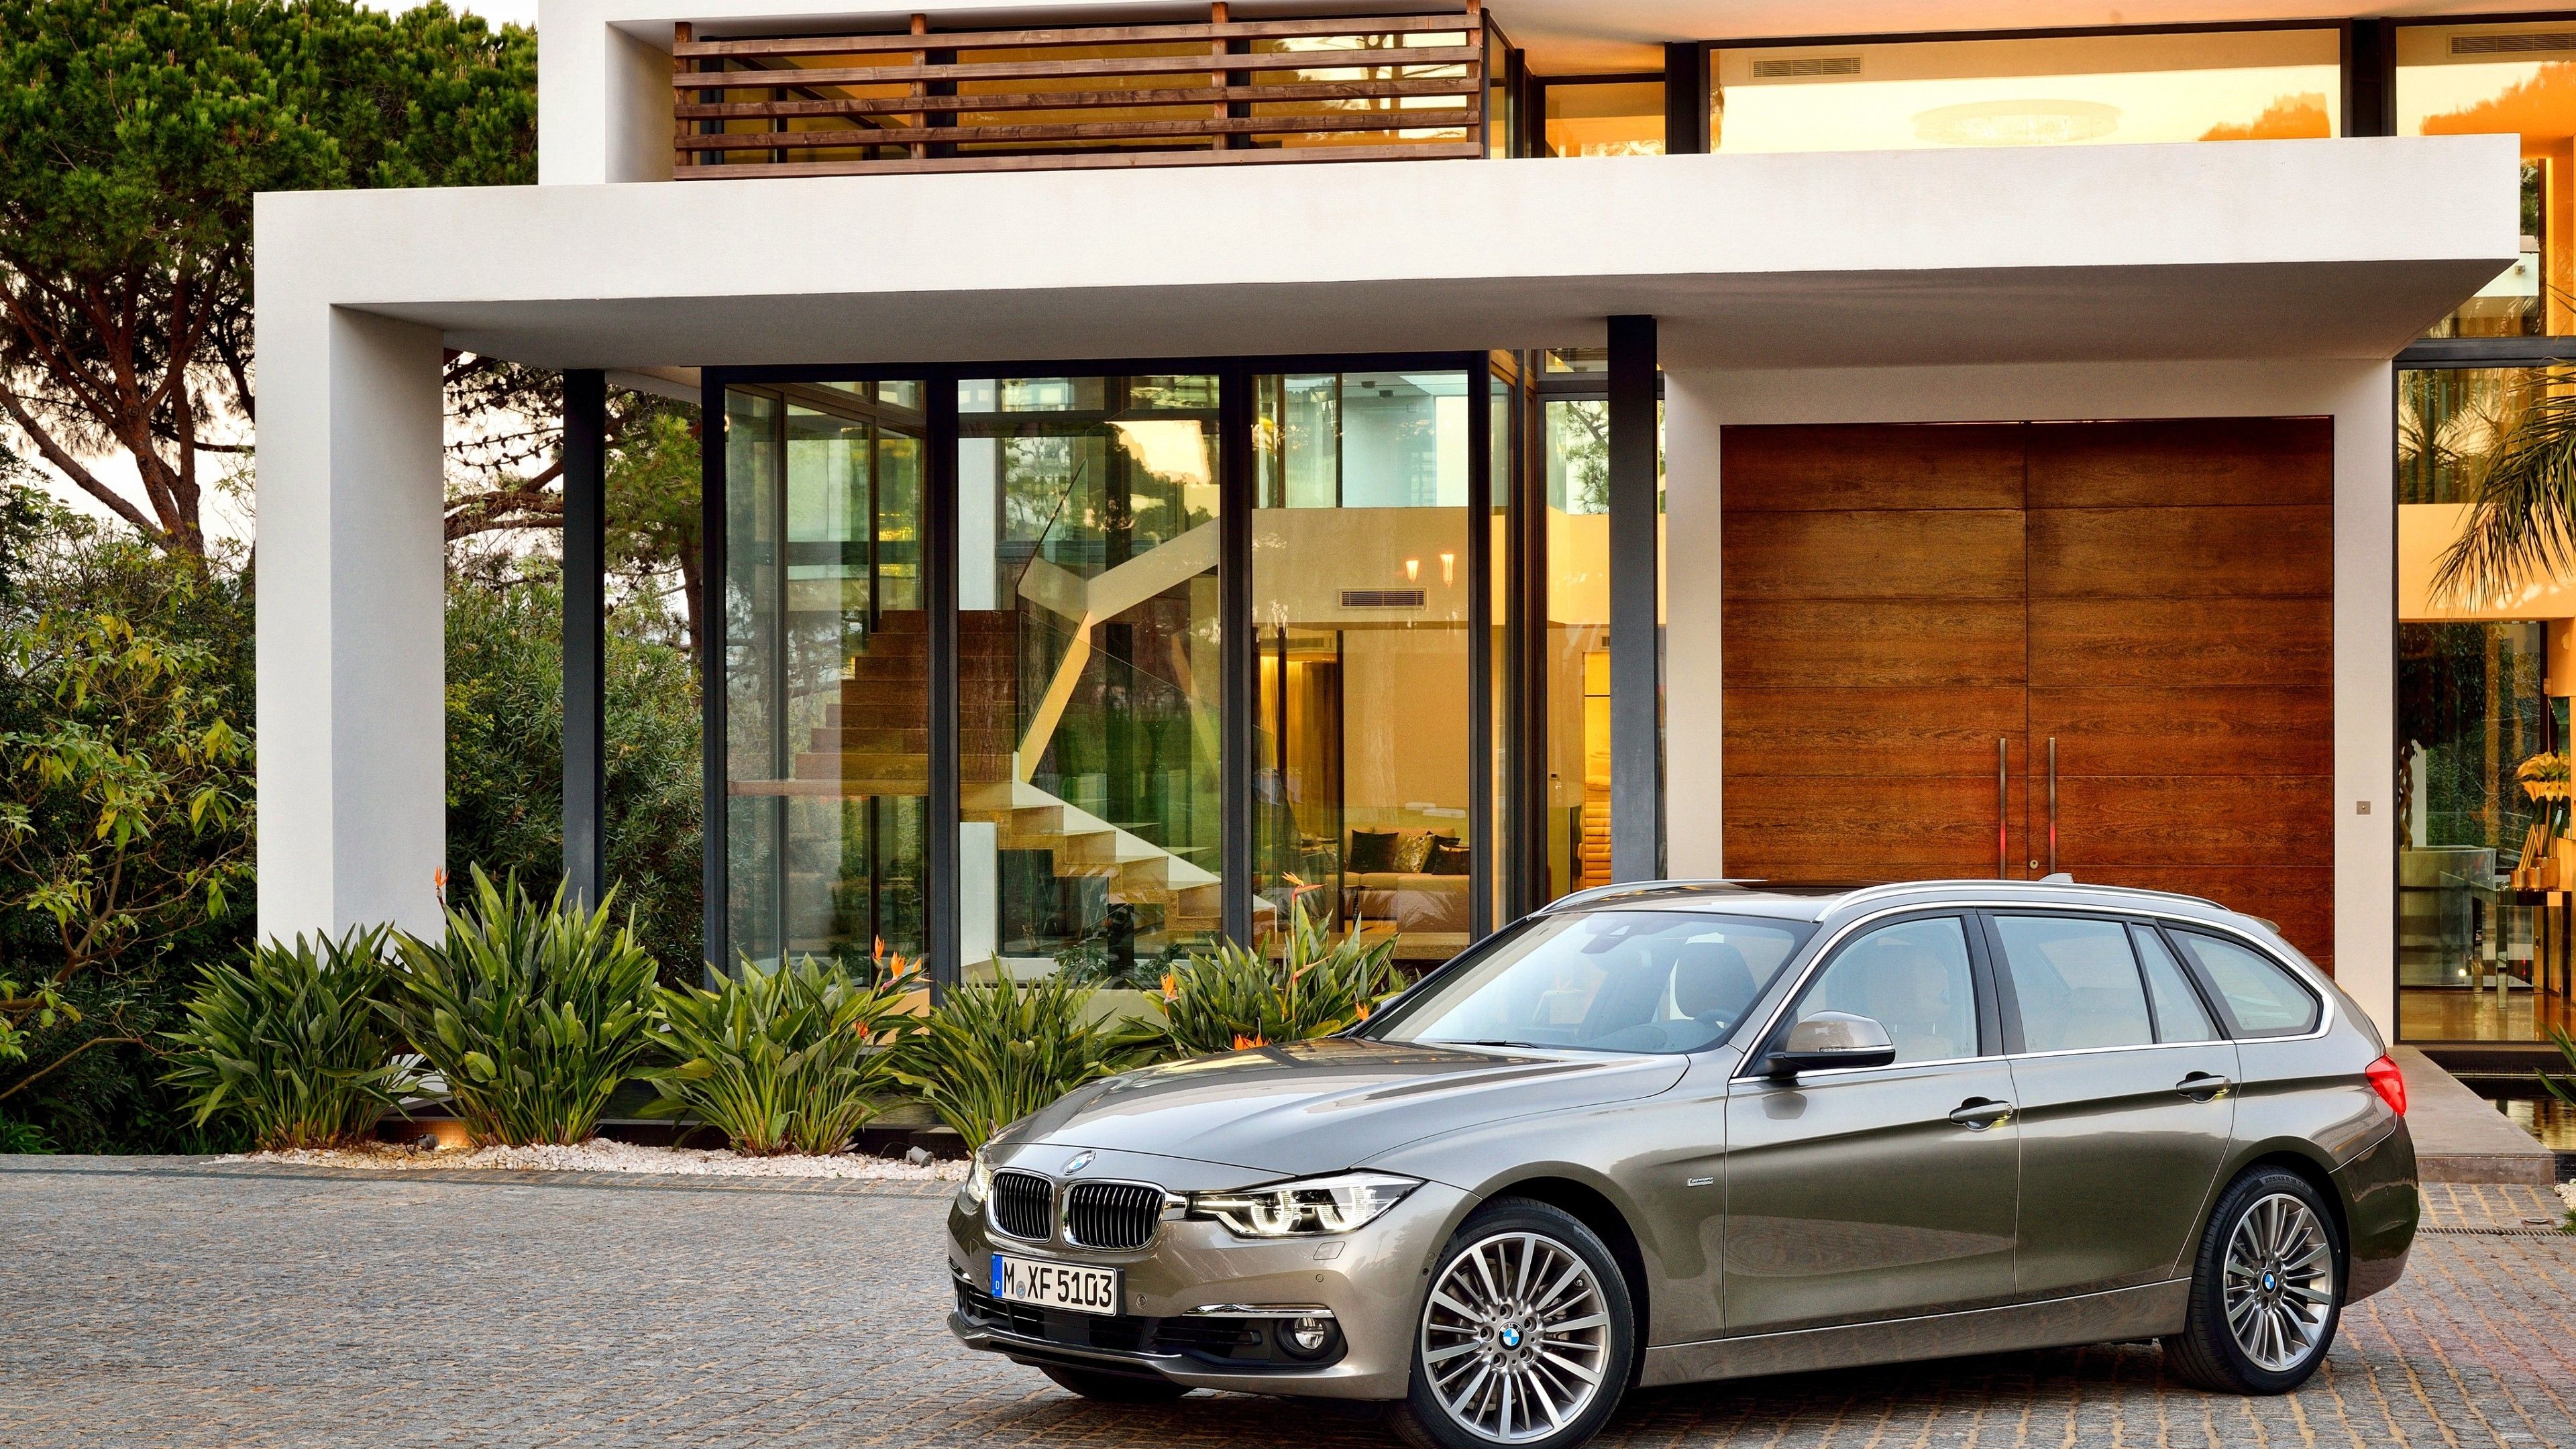 Download 3840x2160 Bmw 3 Series, Side View, Luxury, Cars, House Wallpaper for UHD TV